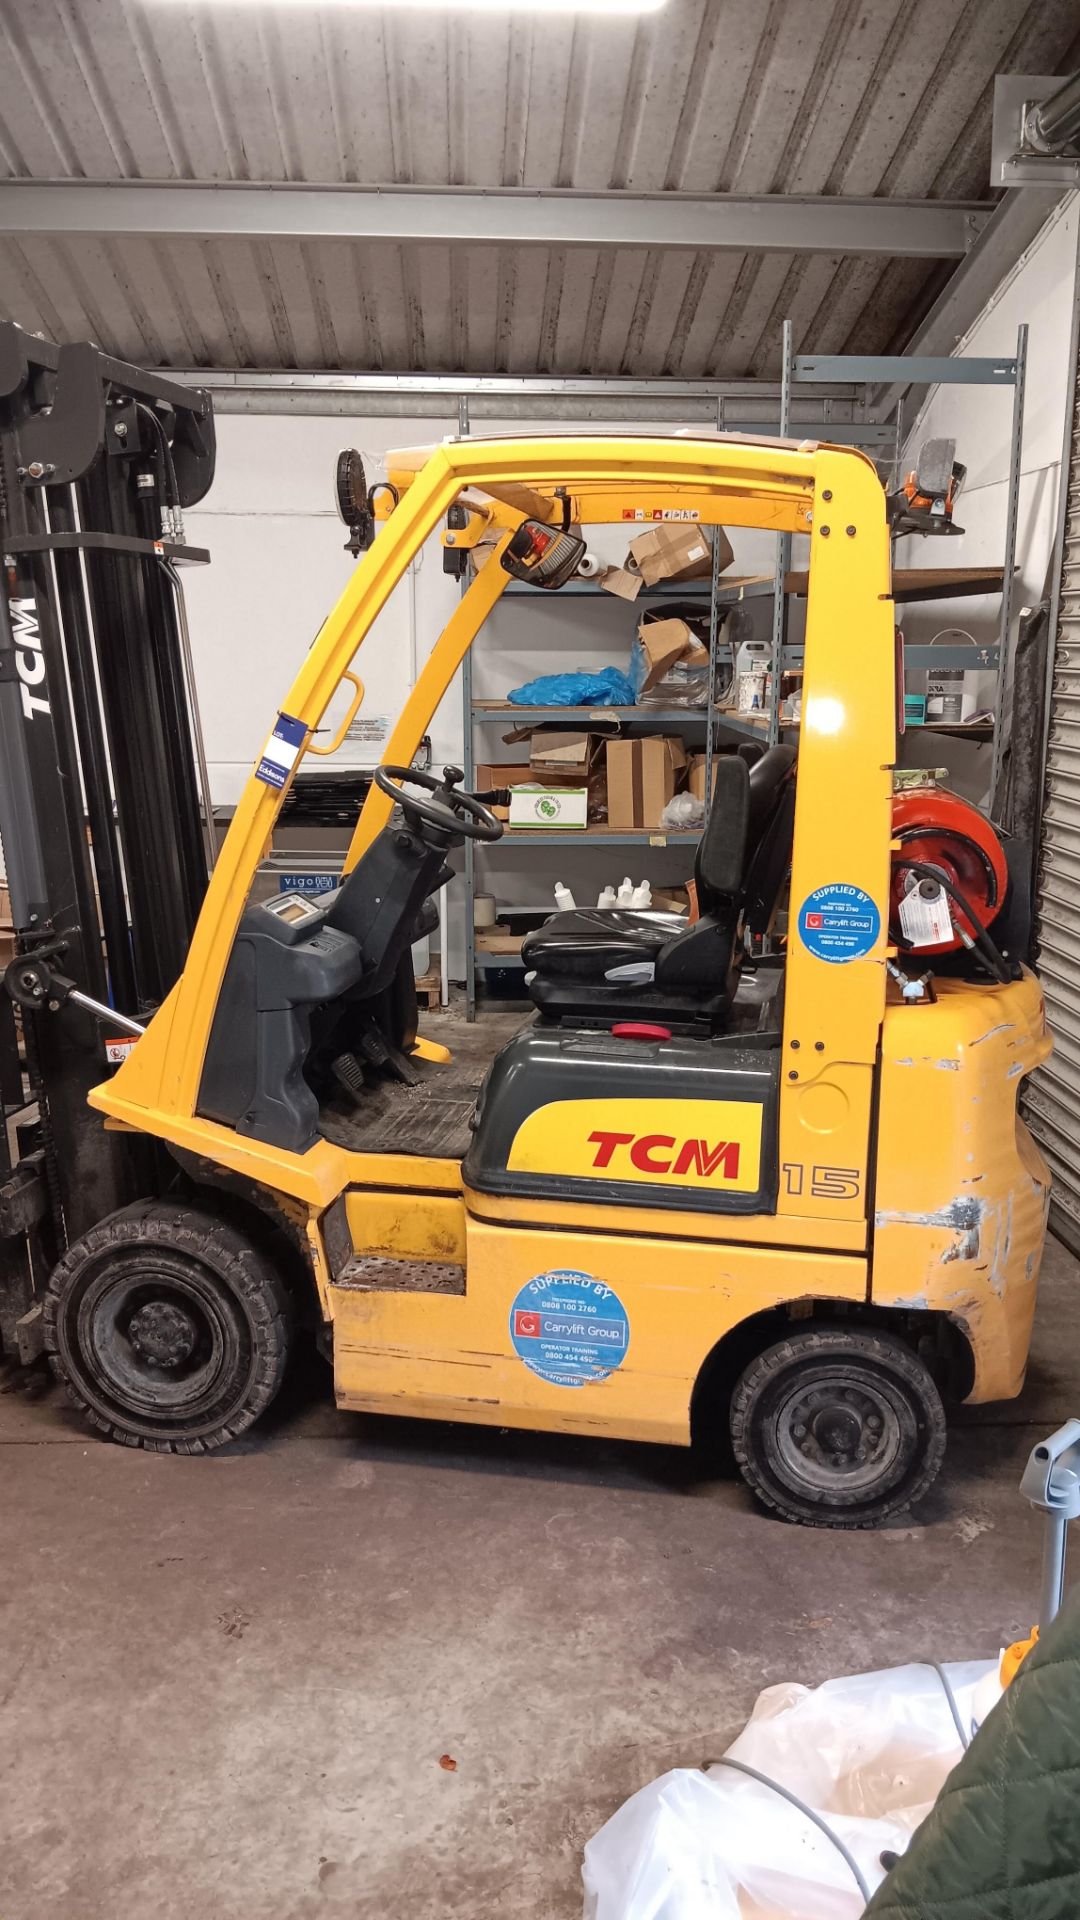 TCM 15 PID1A15LK 1.5ton SWL LPG forklift, serial number P1D1E704039 (2018) fitted side shift, 819 - Image 3 of 10